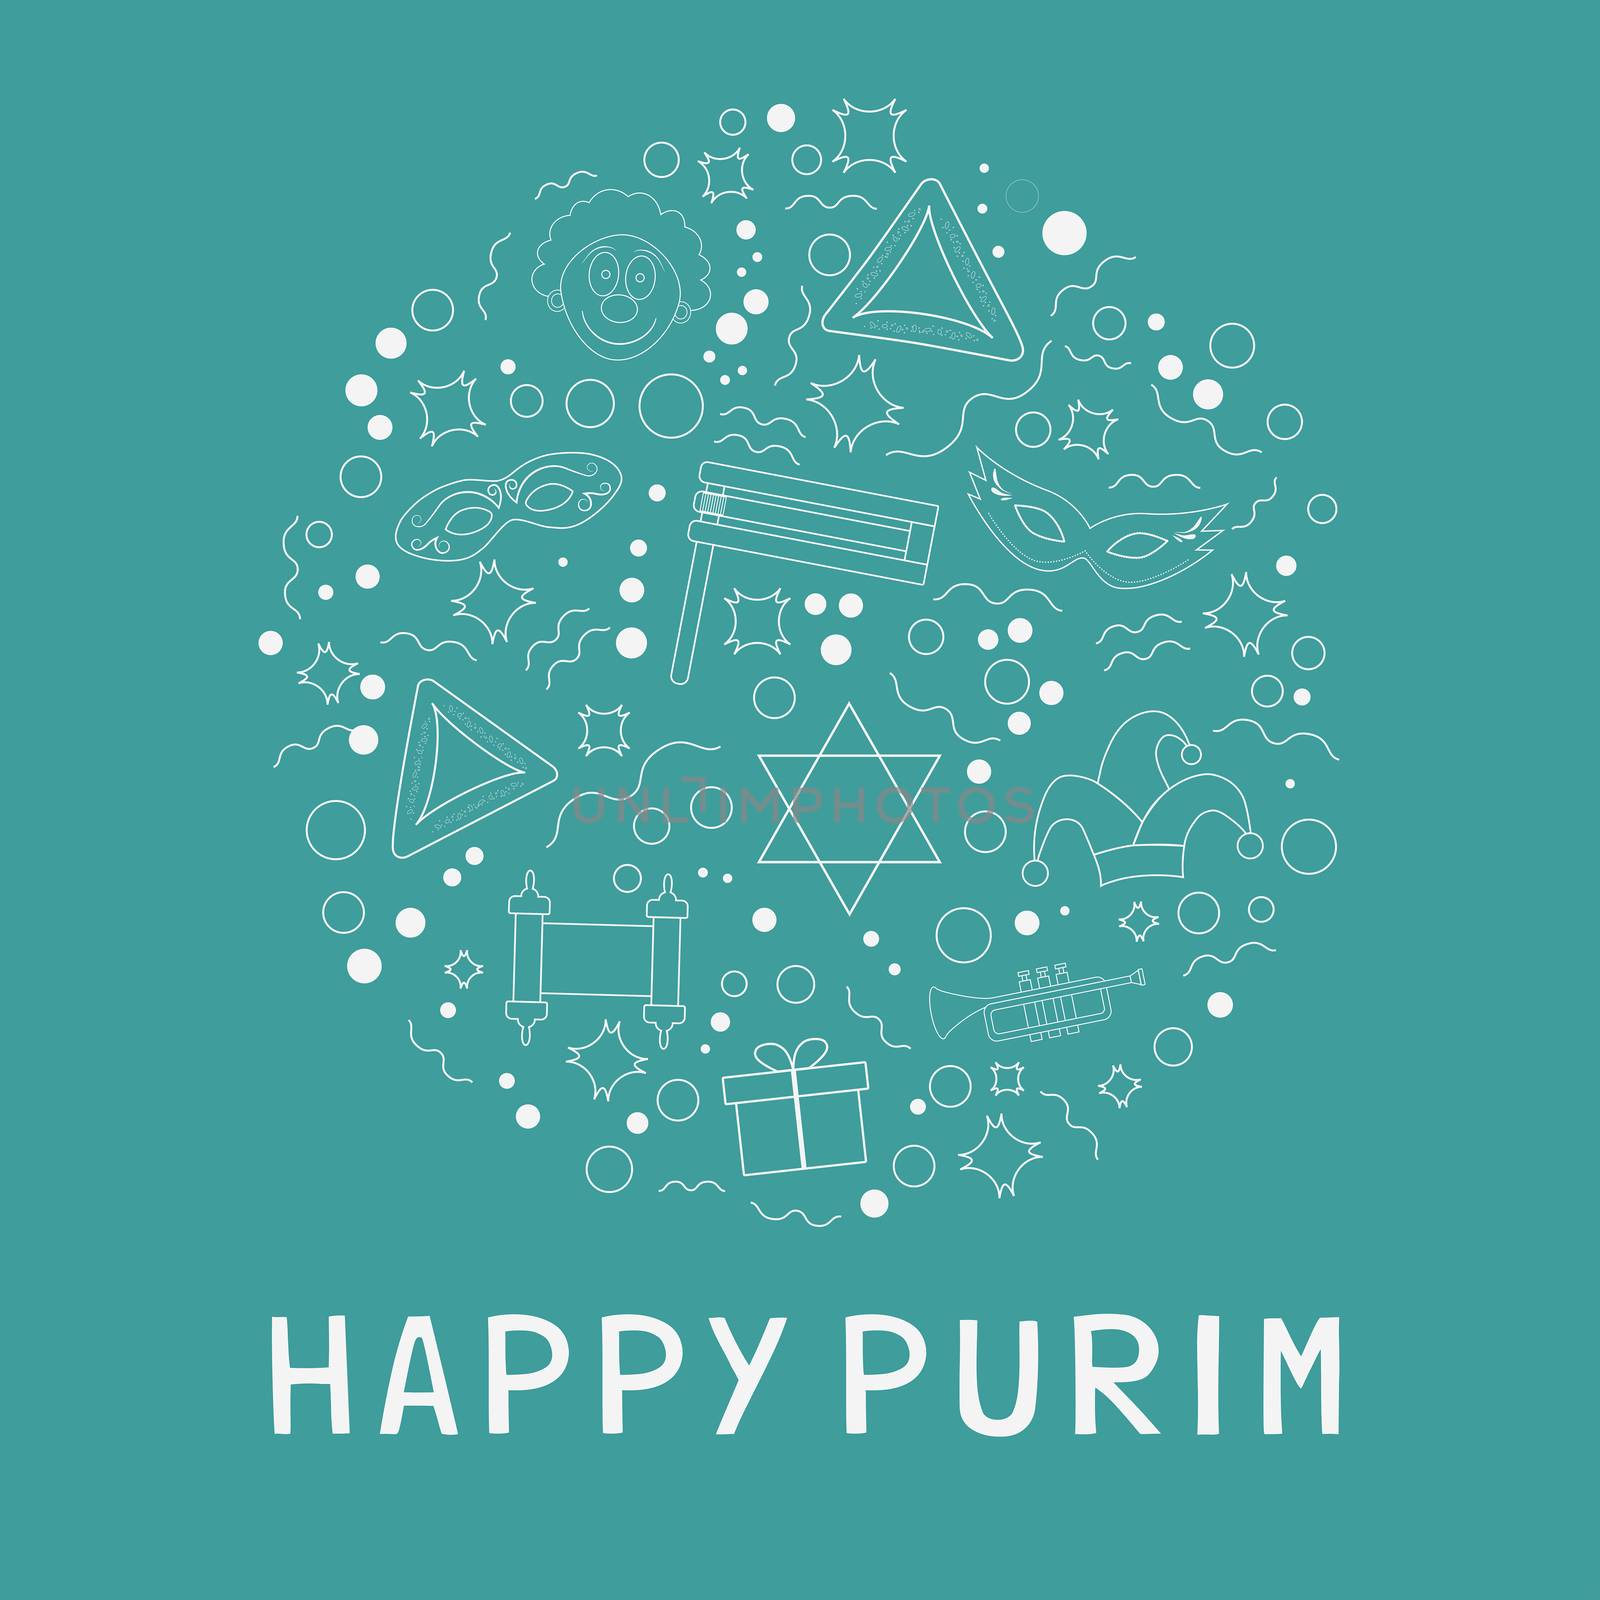 Purim holiday flat design white thin line icons set in round shape with text in english "Happy Purim". Vector eps10 illustration.
